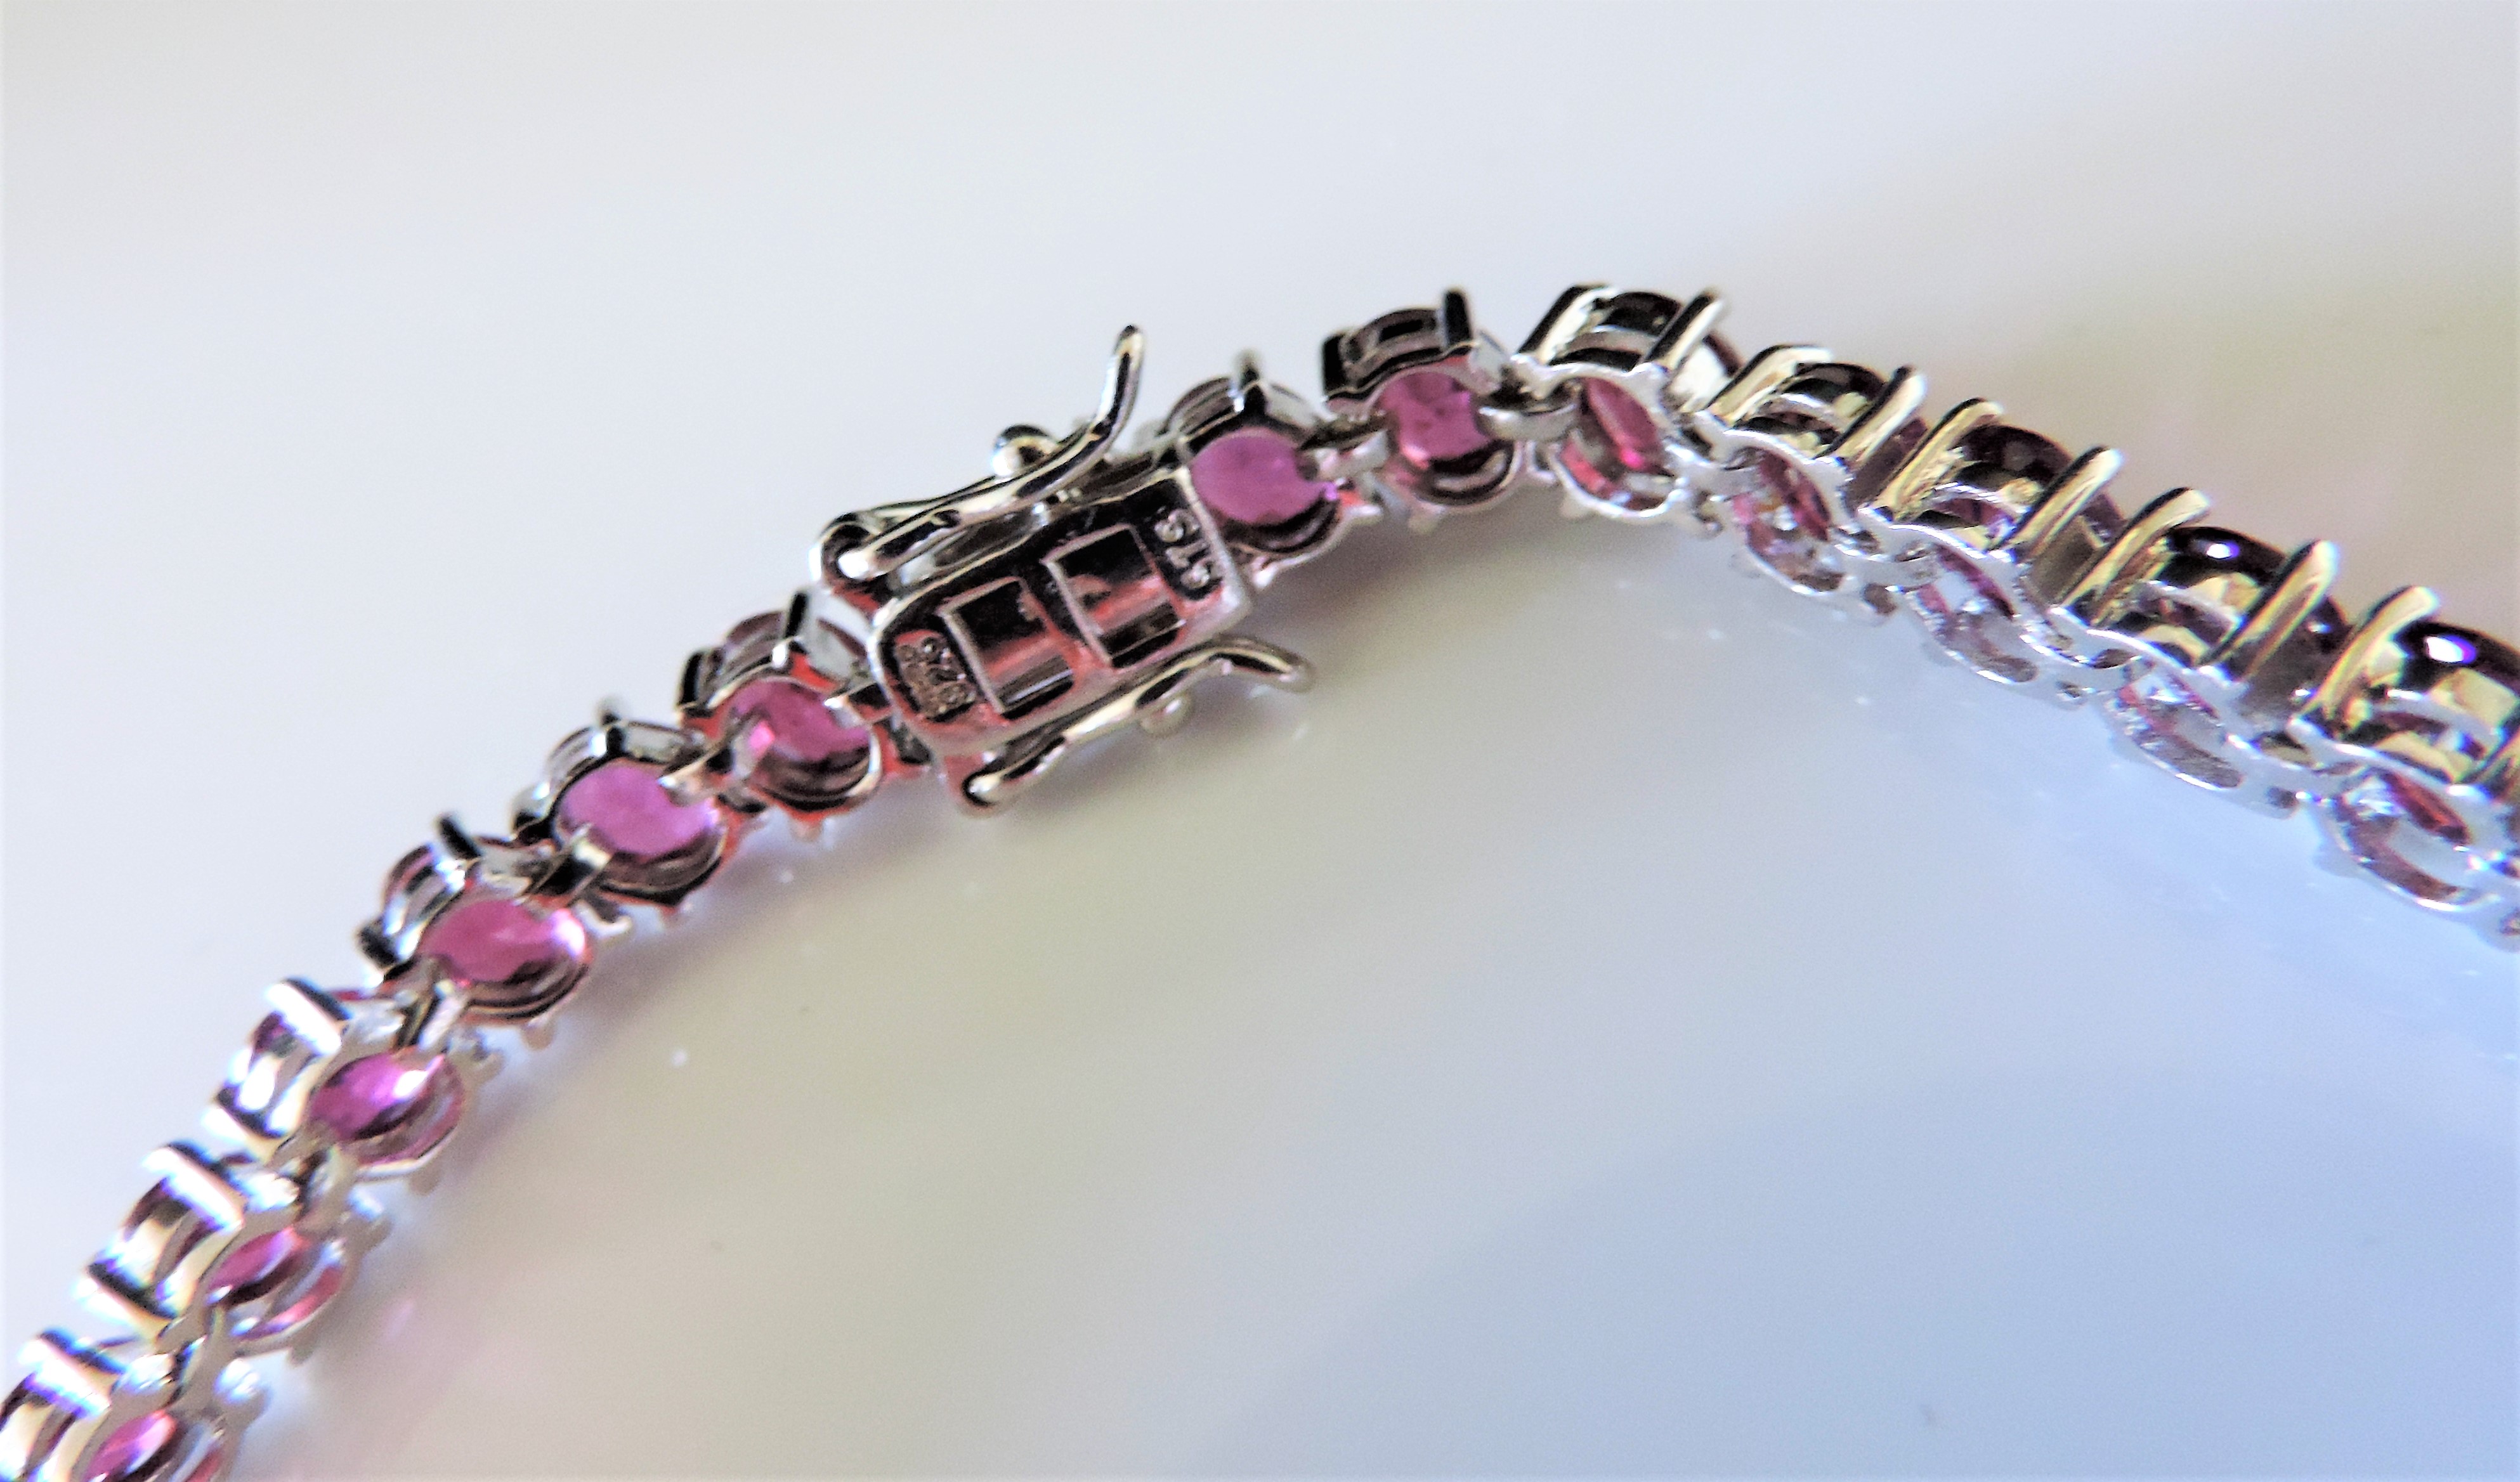 20ct Pink Tourmaline Tennis Bracelet in Sterling Silver - Image 6 of 6